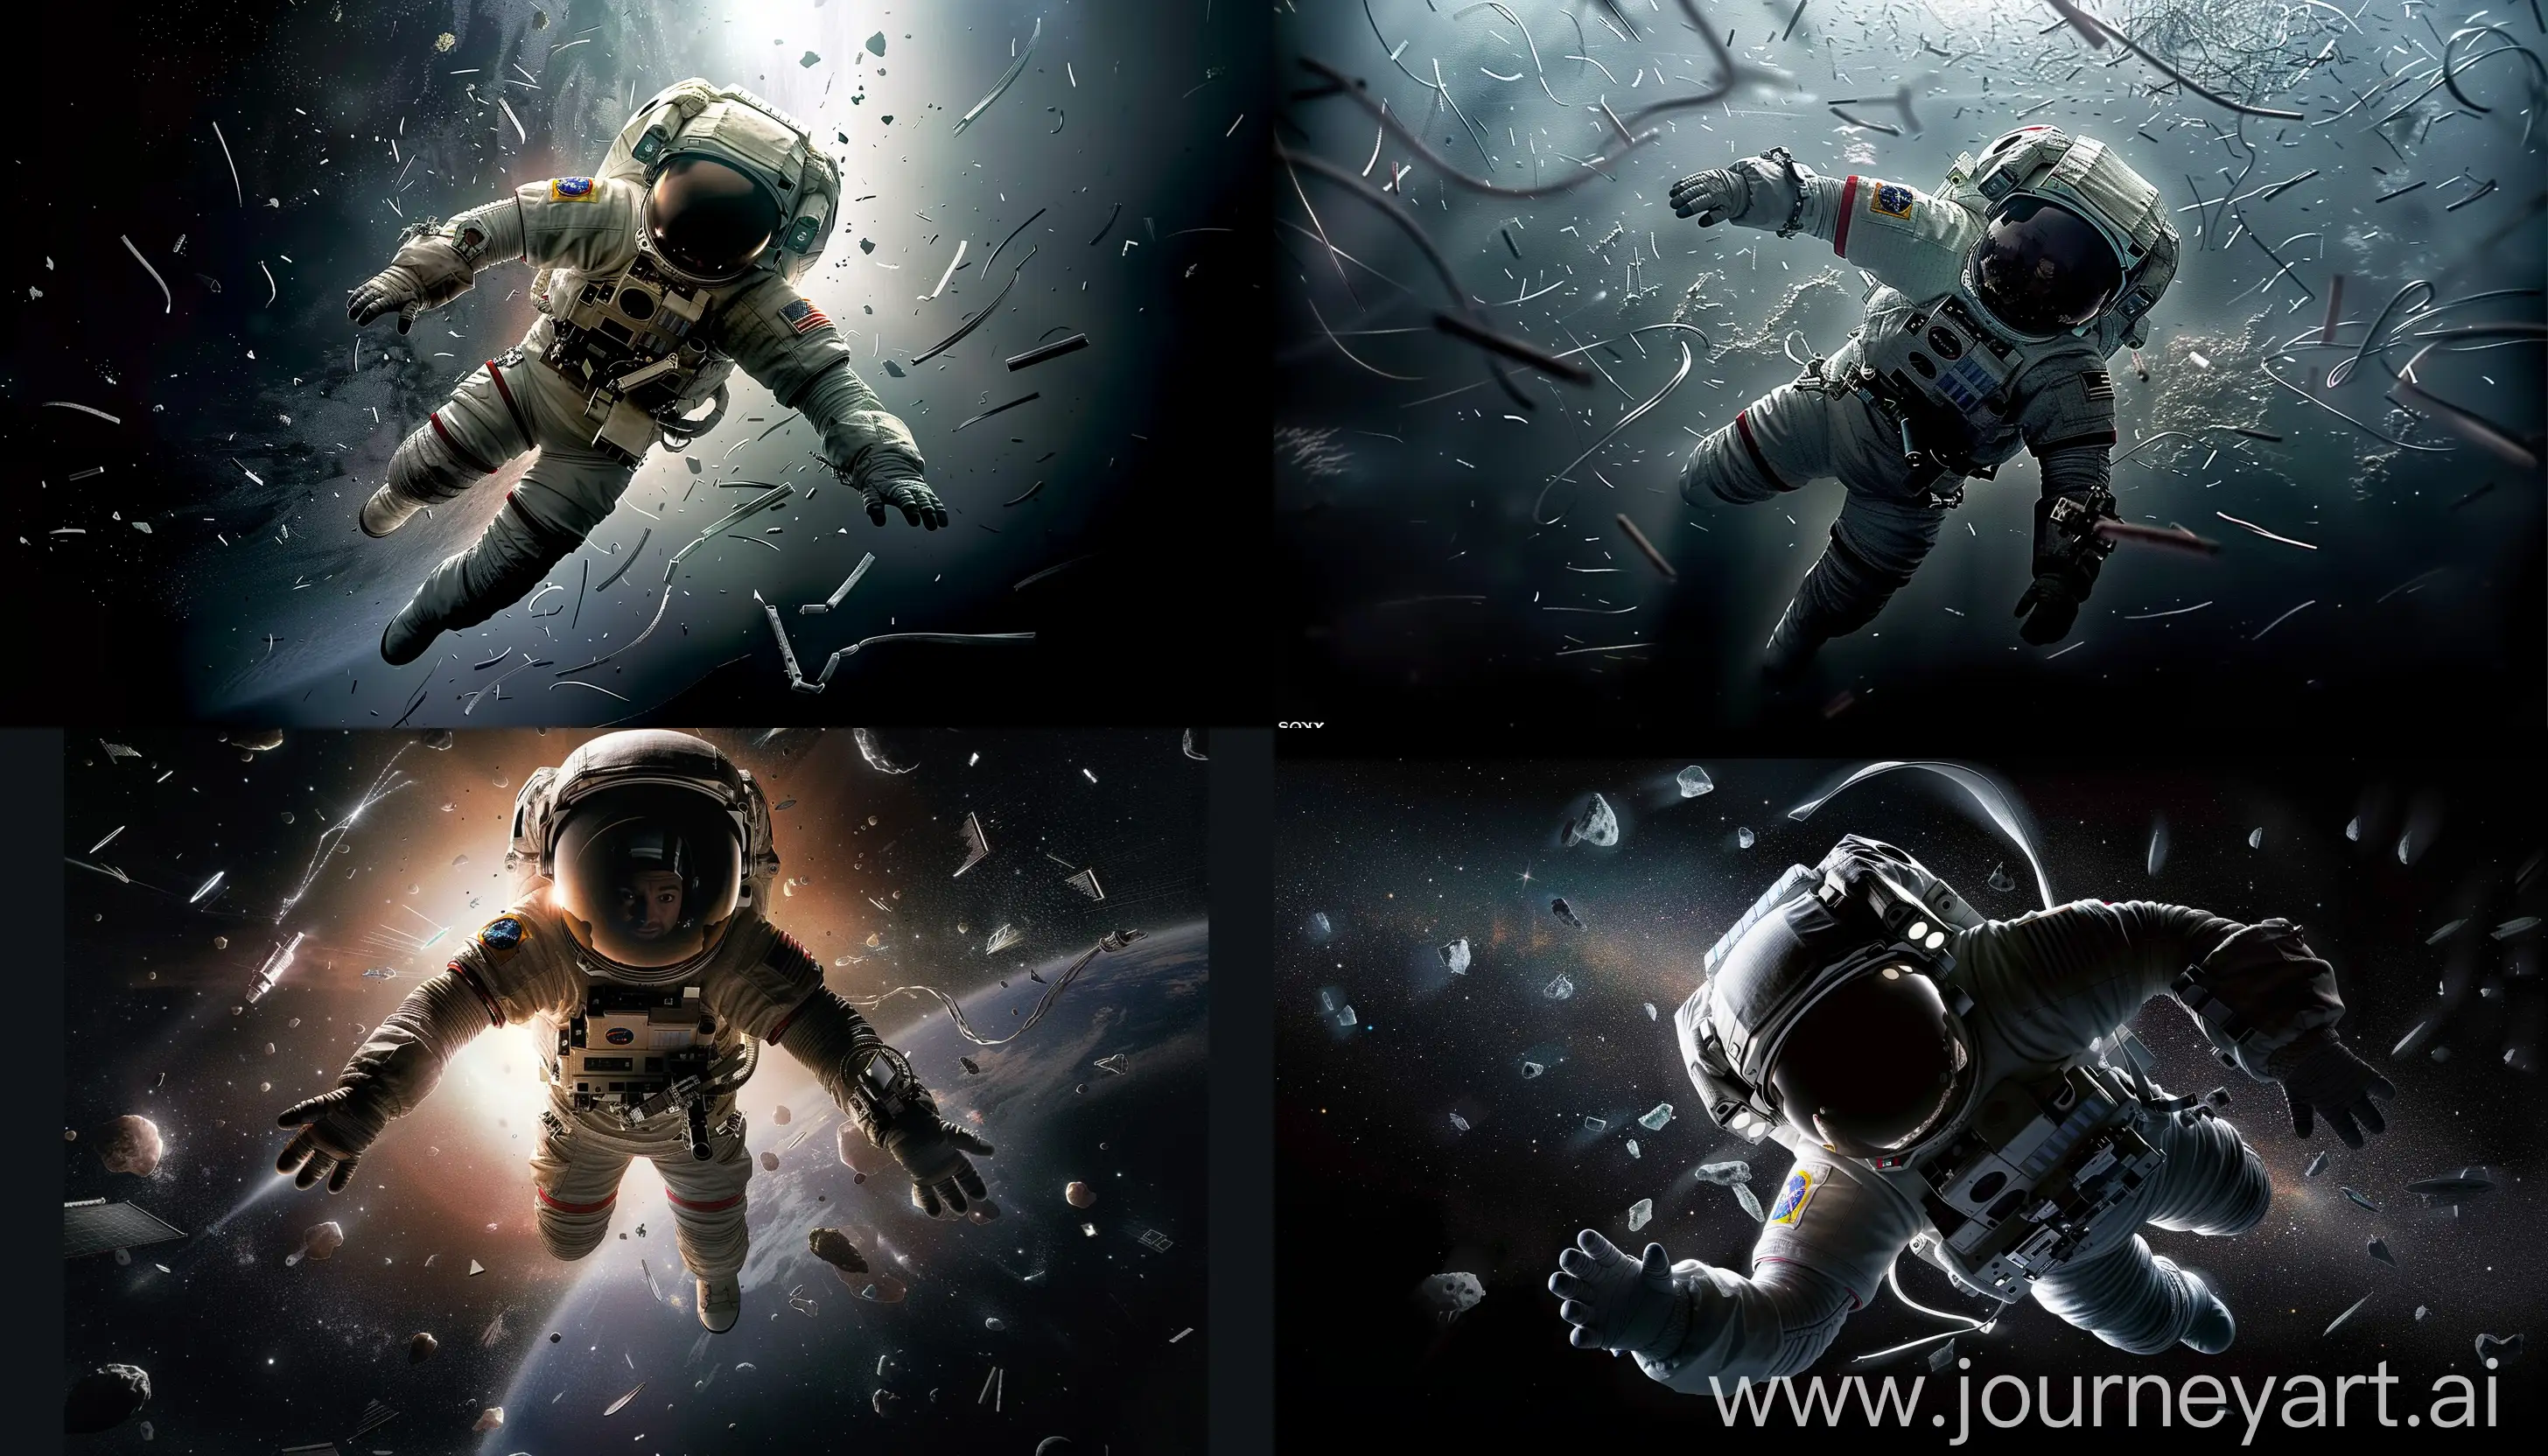 A cinematic scene of an astronaut adrift in space with debris from the spacecraft scattered everywhere, filmed with the Sony VENICE camera equipped with a stereoscopic 3D beam splitter system —sref https://p4.wallpaperbetter.com/wallpaper/554/1017/259/2013-gravity-movie-wallpaper-preview.jpg  --ar 7:4 --v 6 --style raw